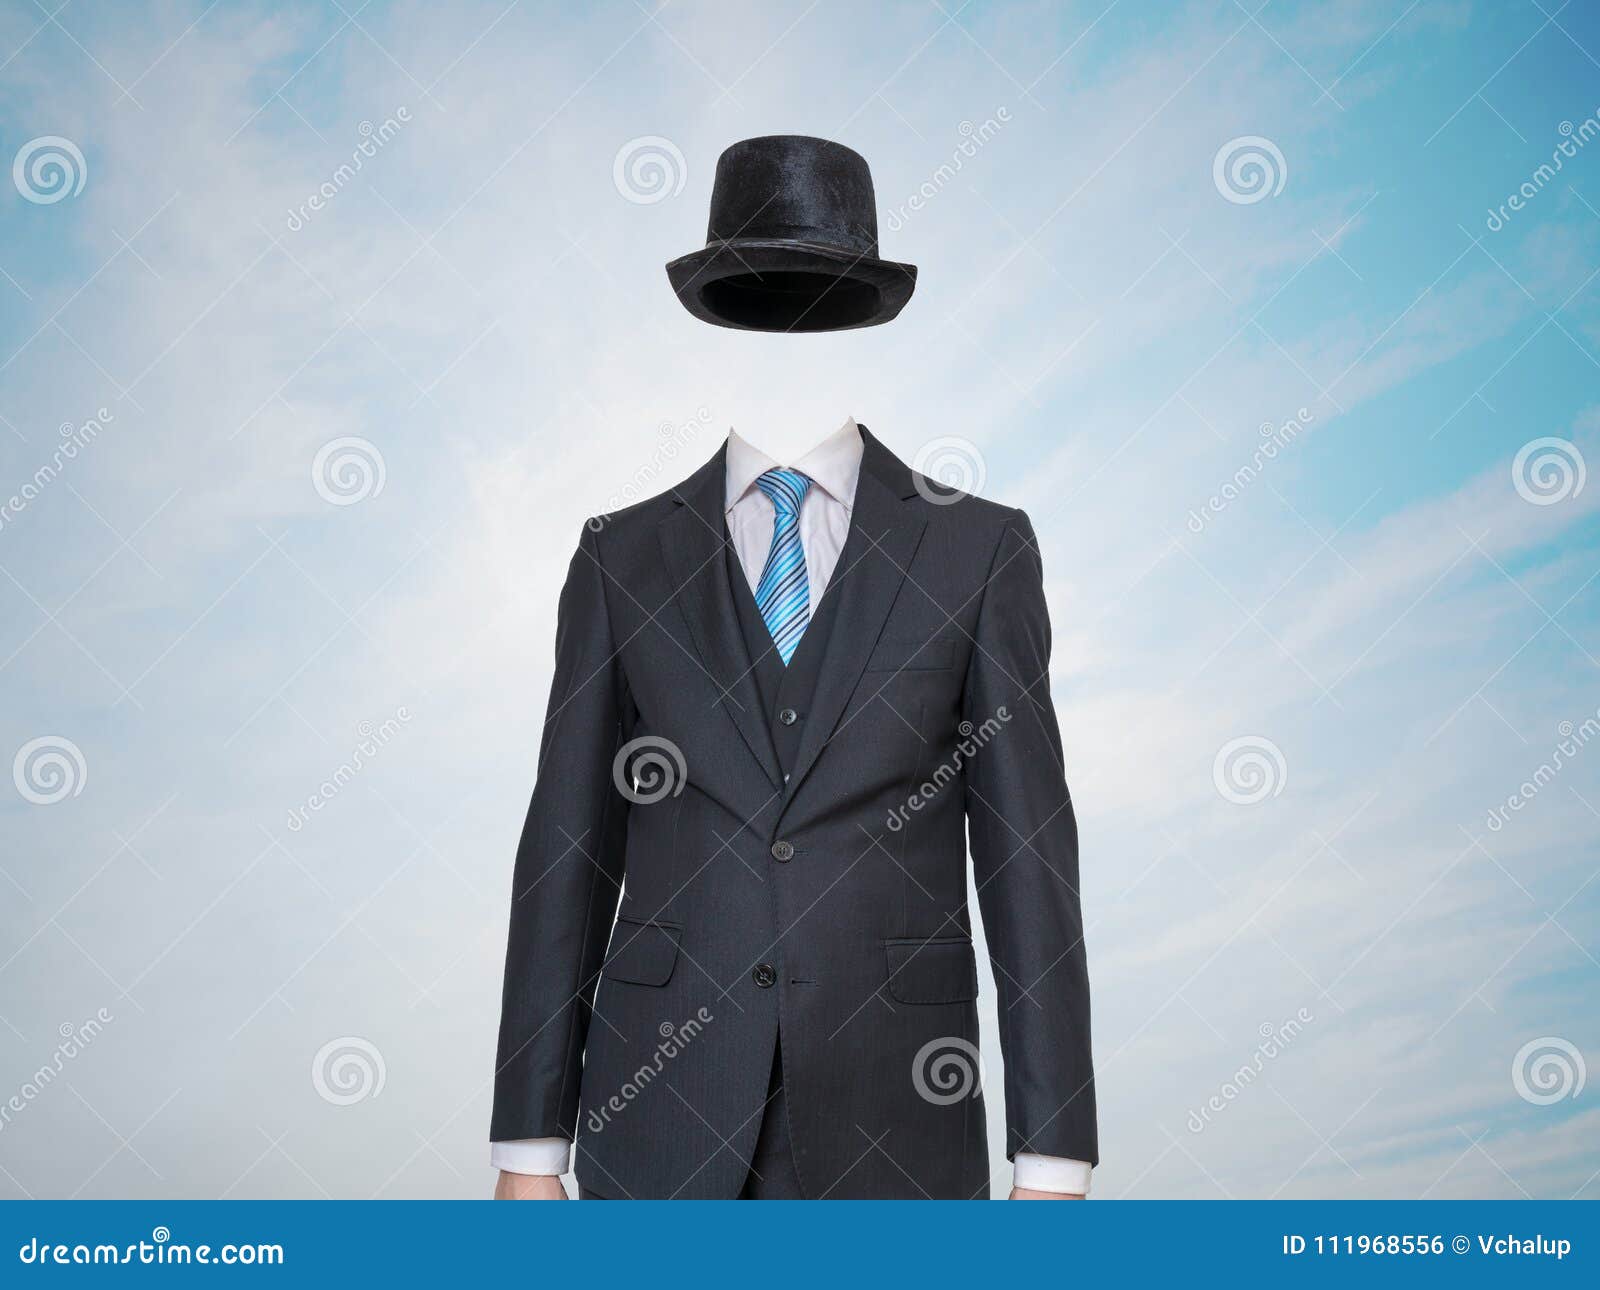 anonymous or invisible man in suit